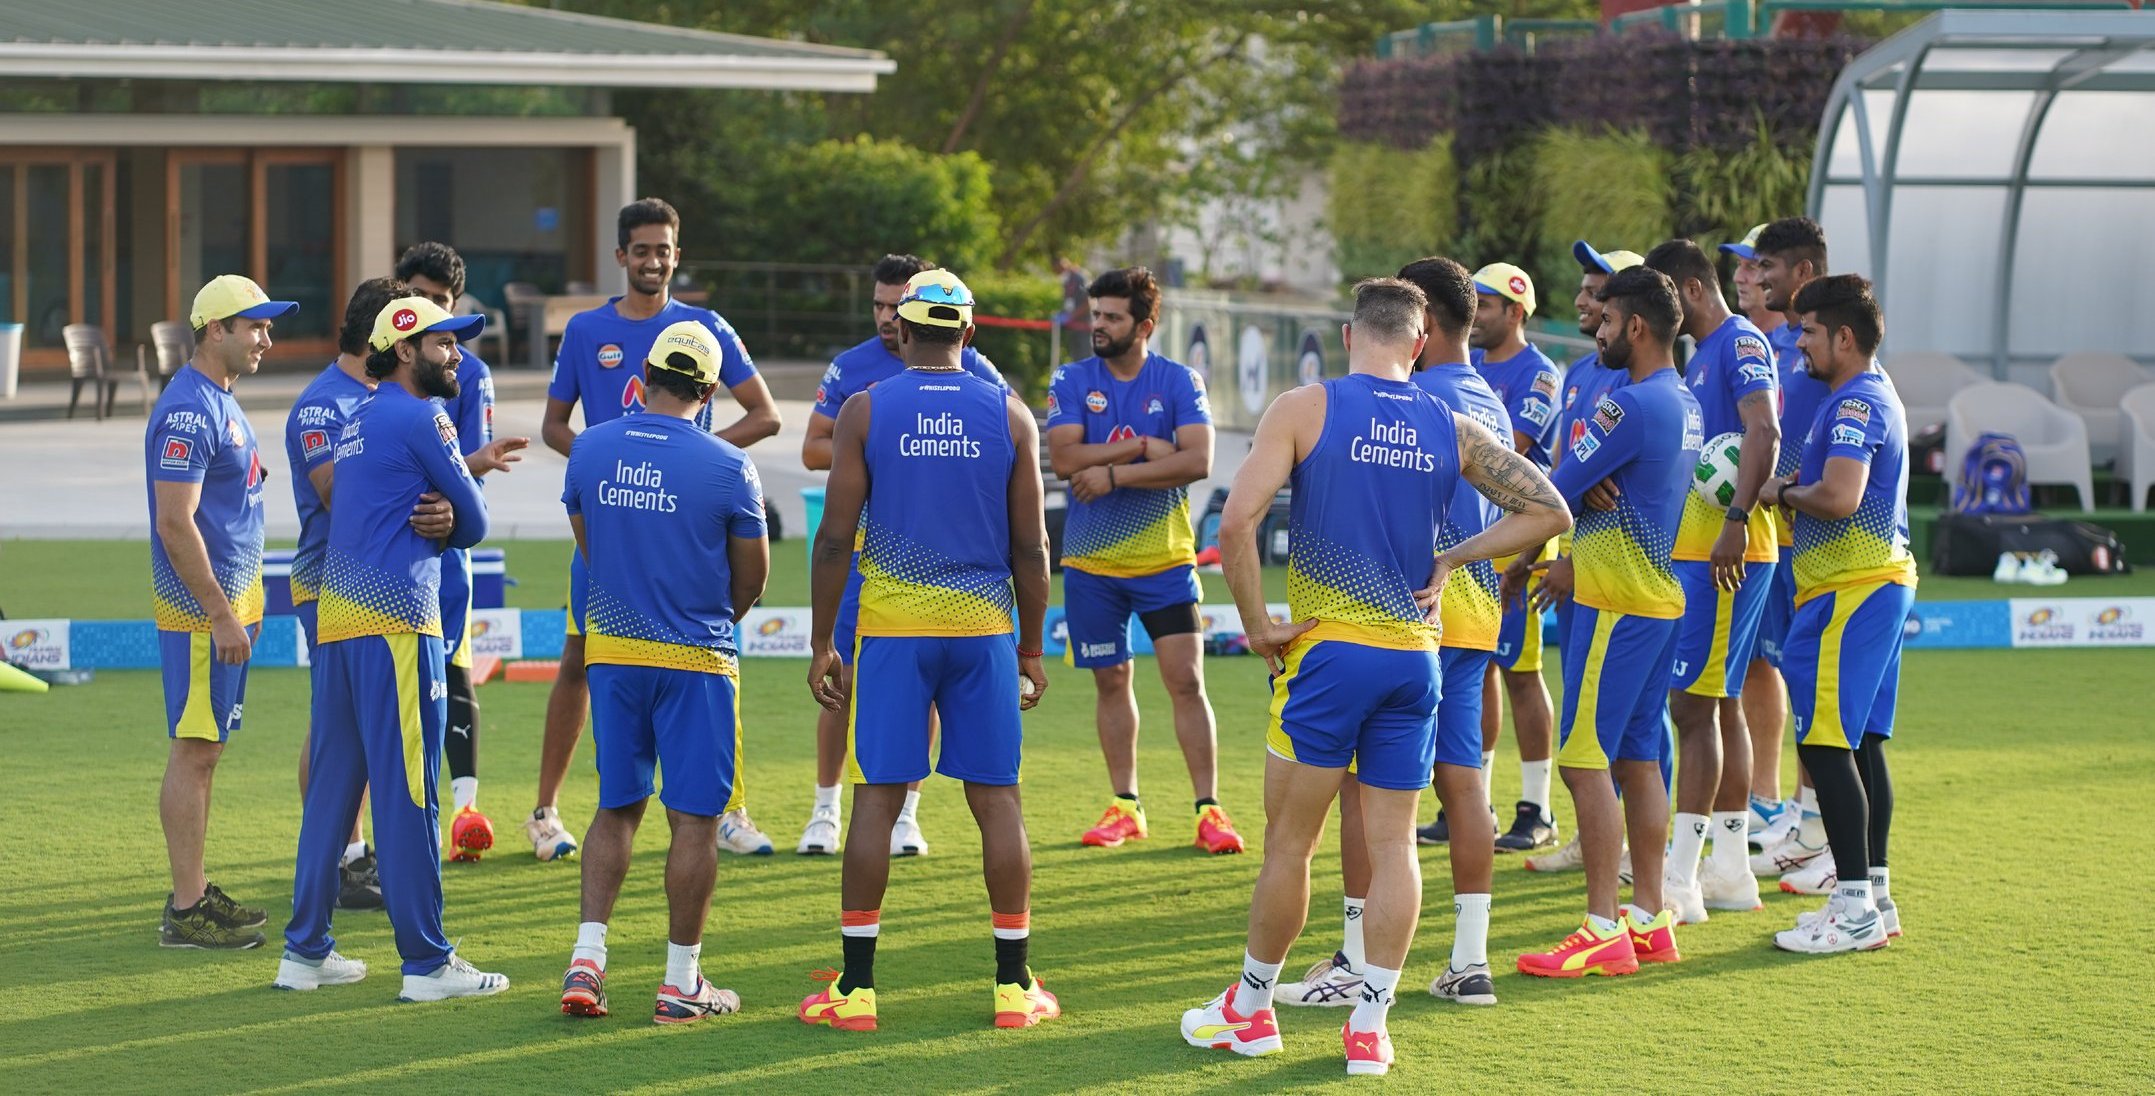 CSK players in training ahead of IPL 2021 | @ChennaiIPL/Twitter